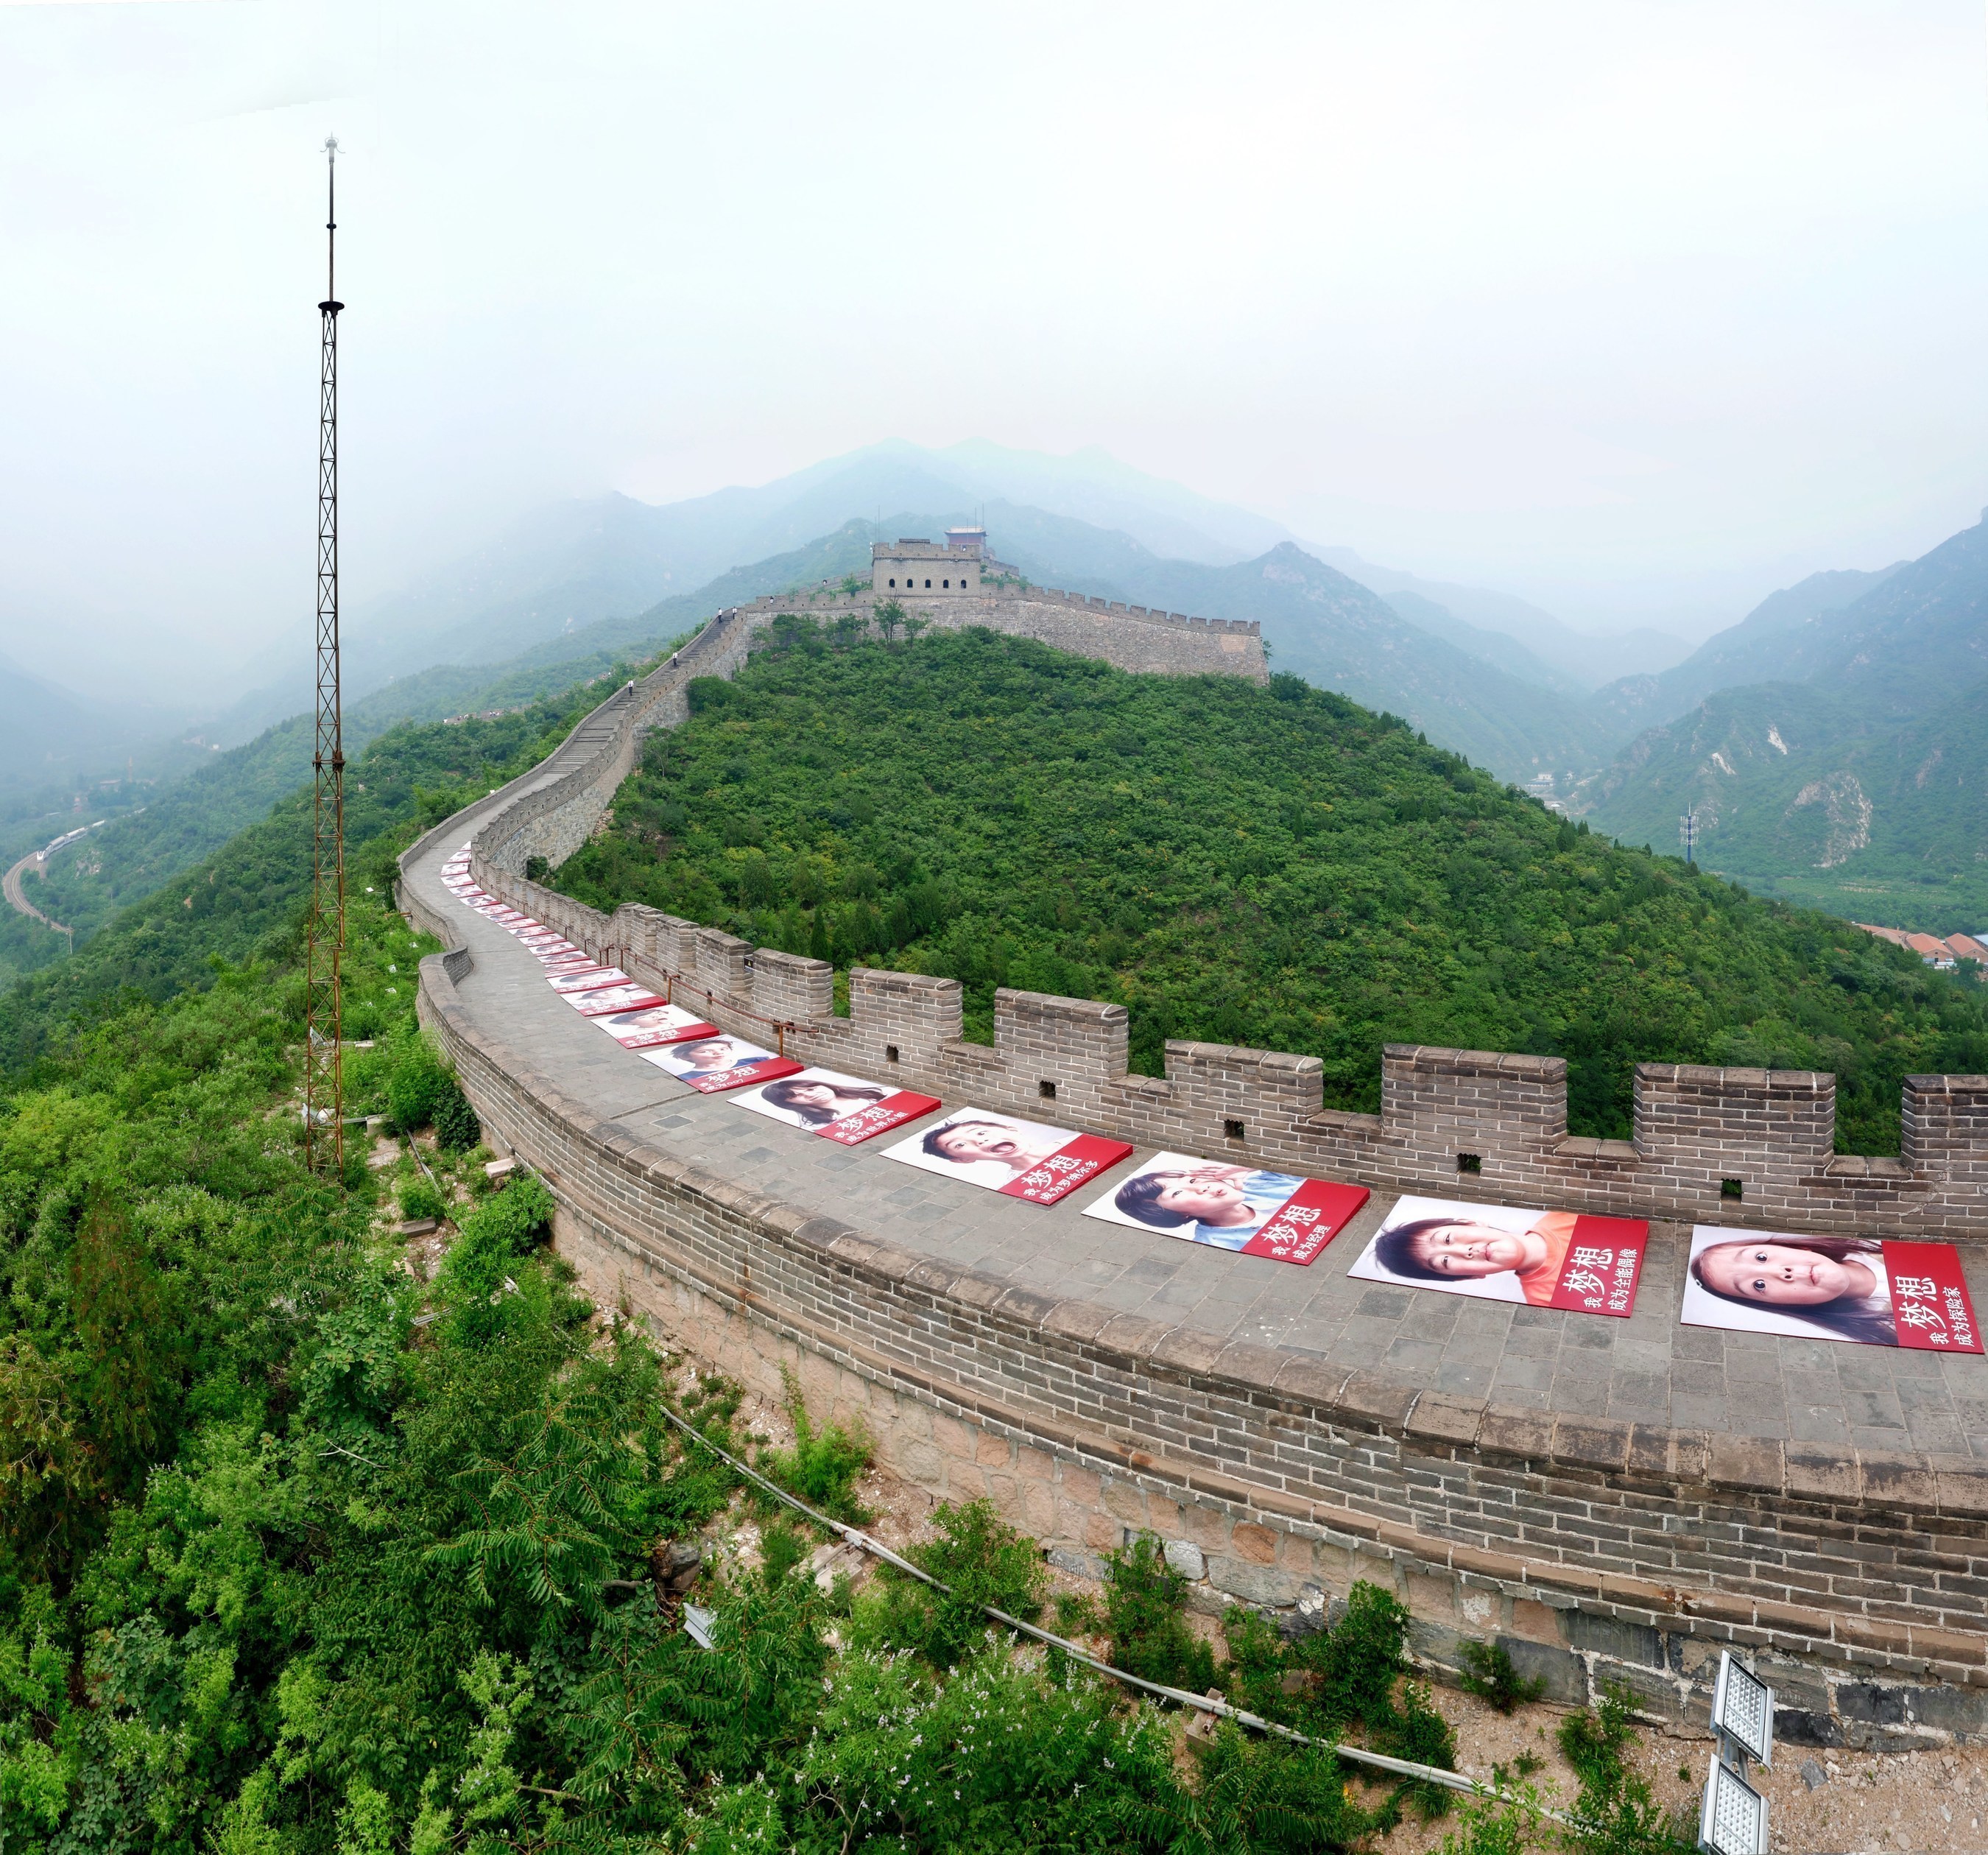 SK-II "Dream Again" Event at the Great Wall of China